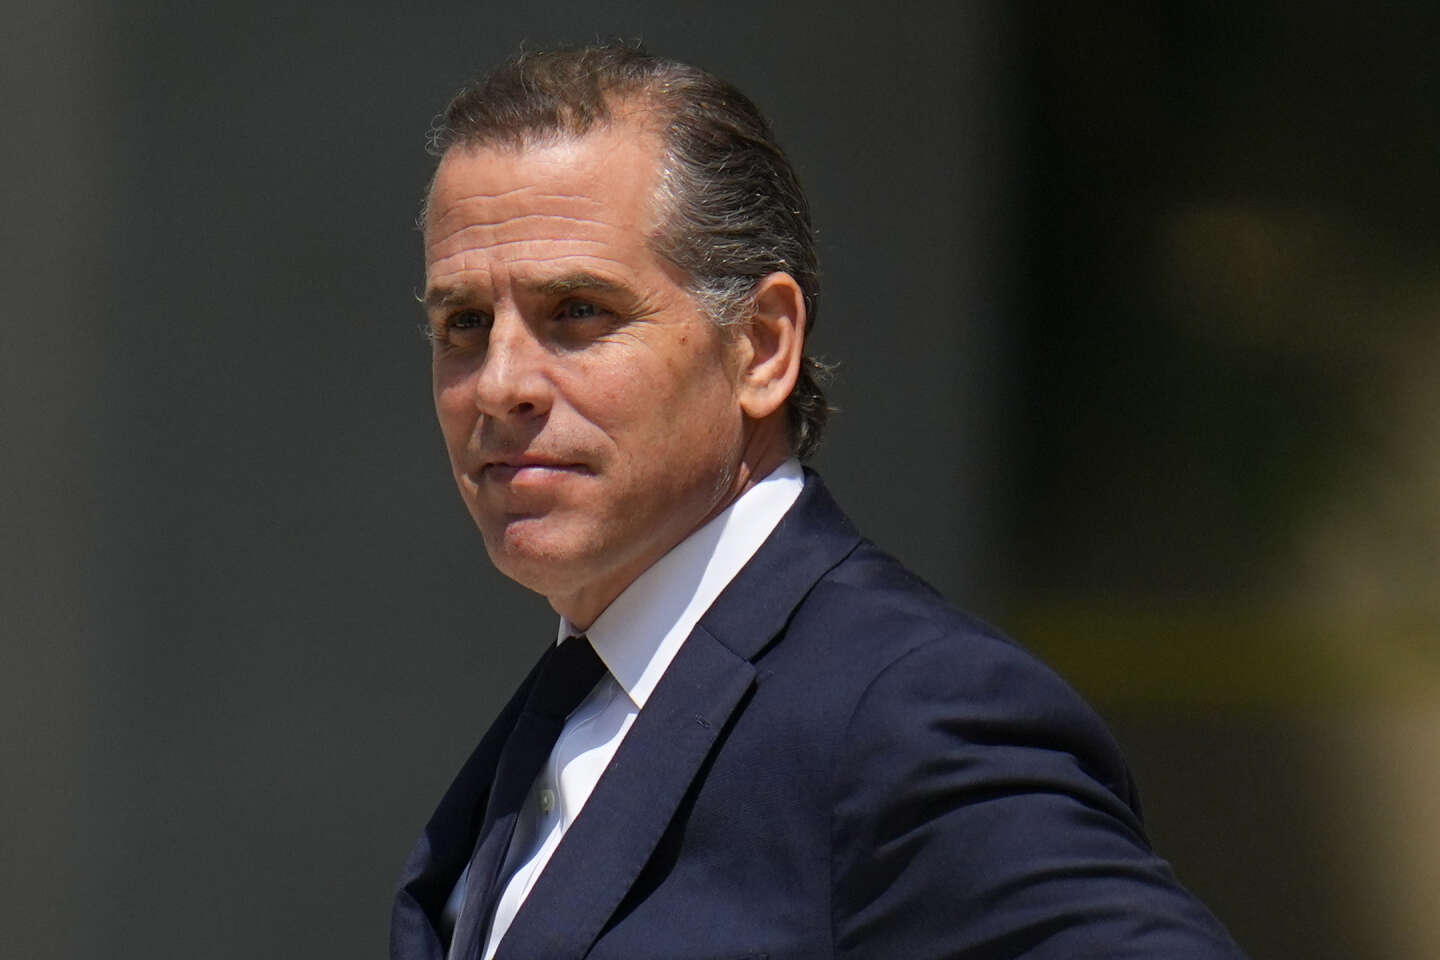 The US President’s son, Hunter Biden, was accused by the federal government of illegally possessing a gun.